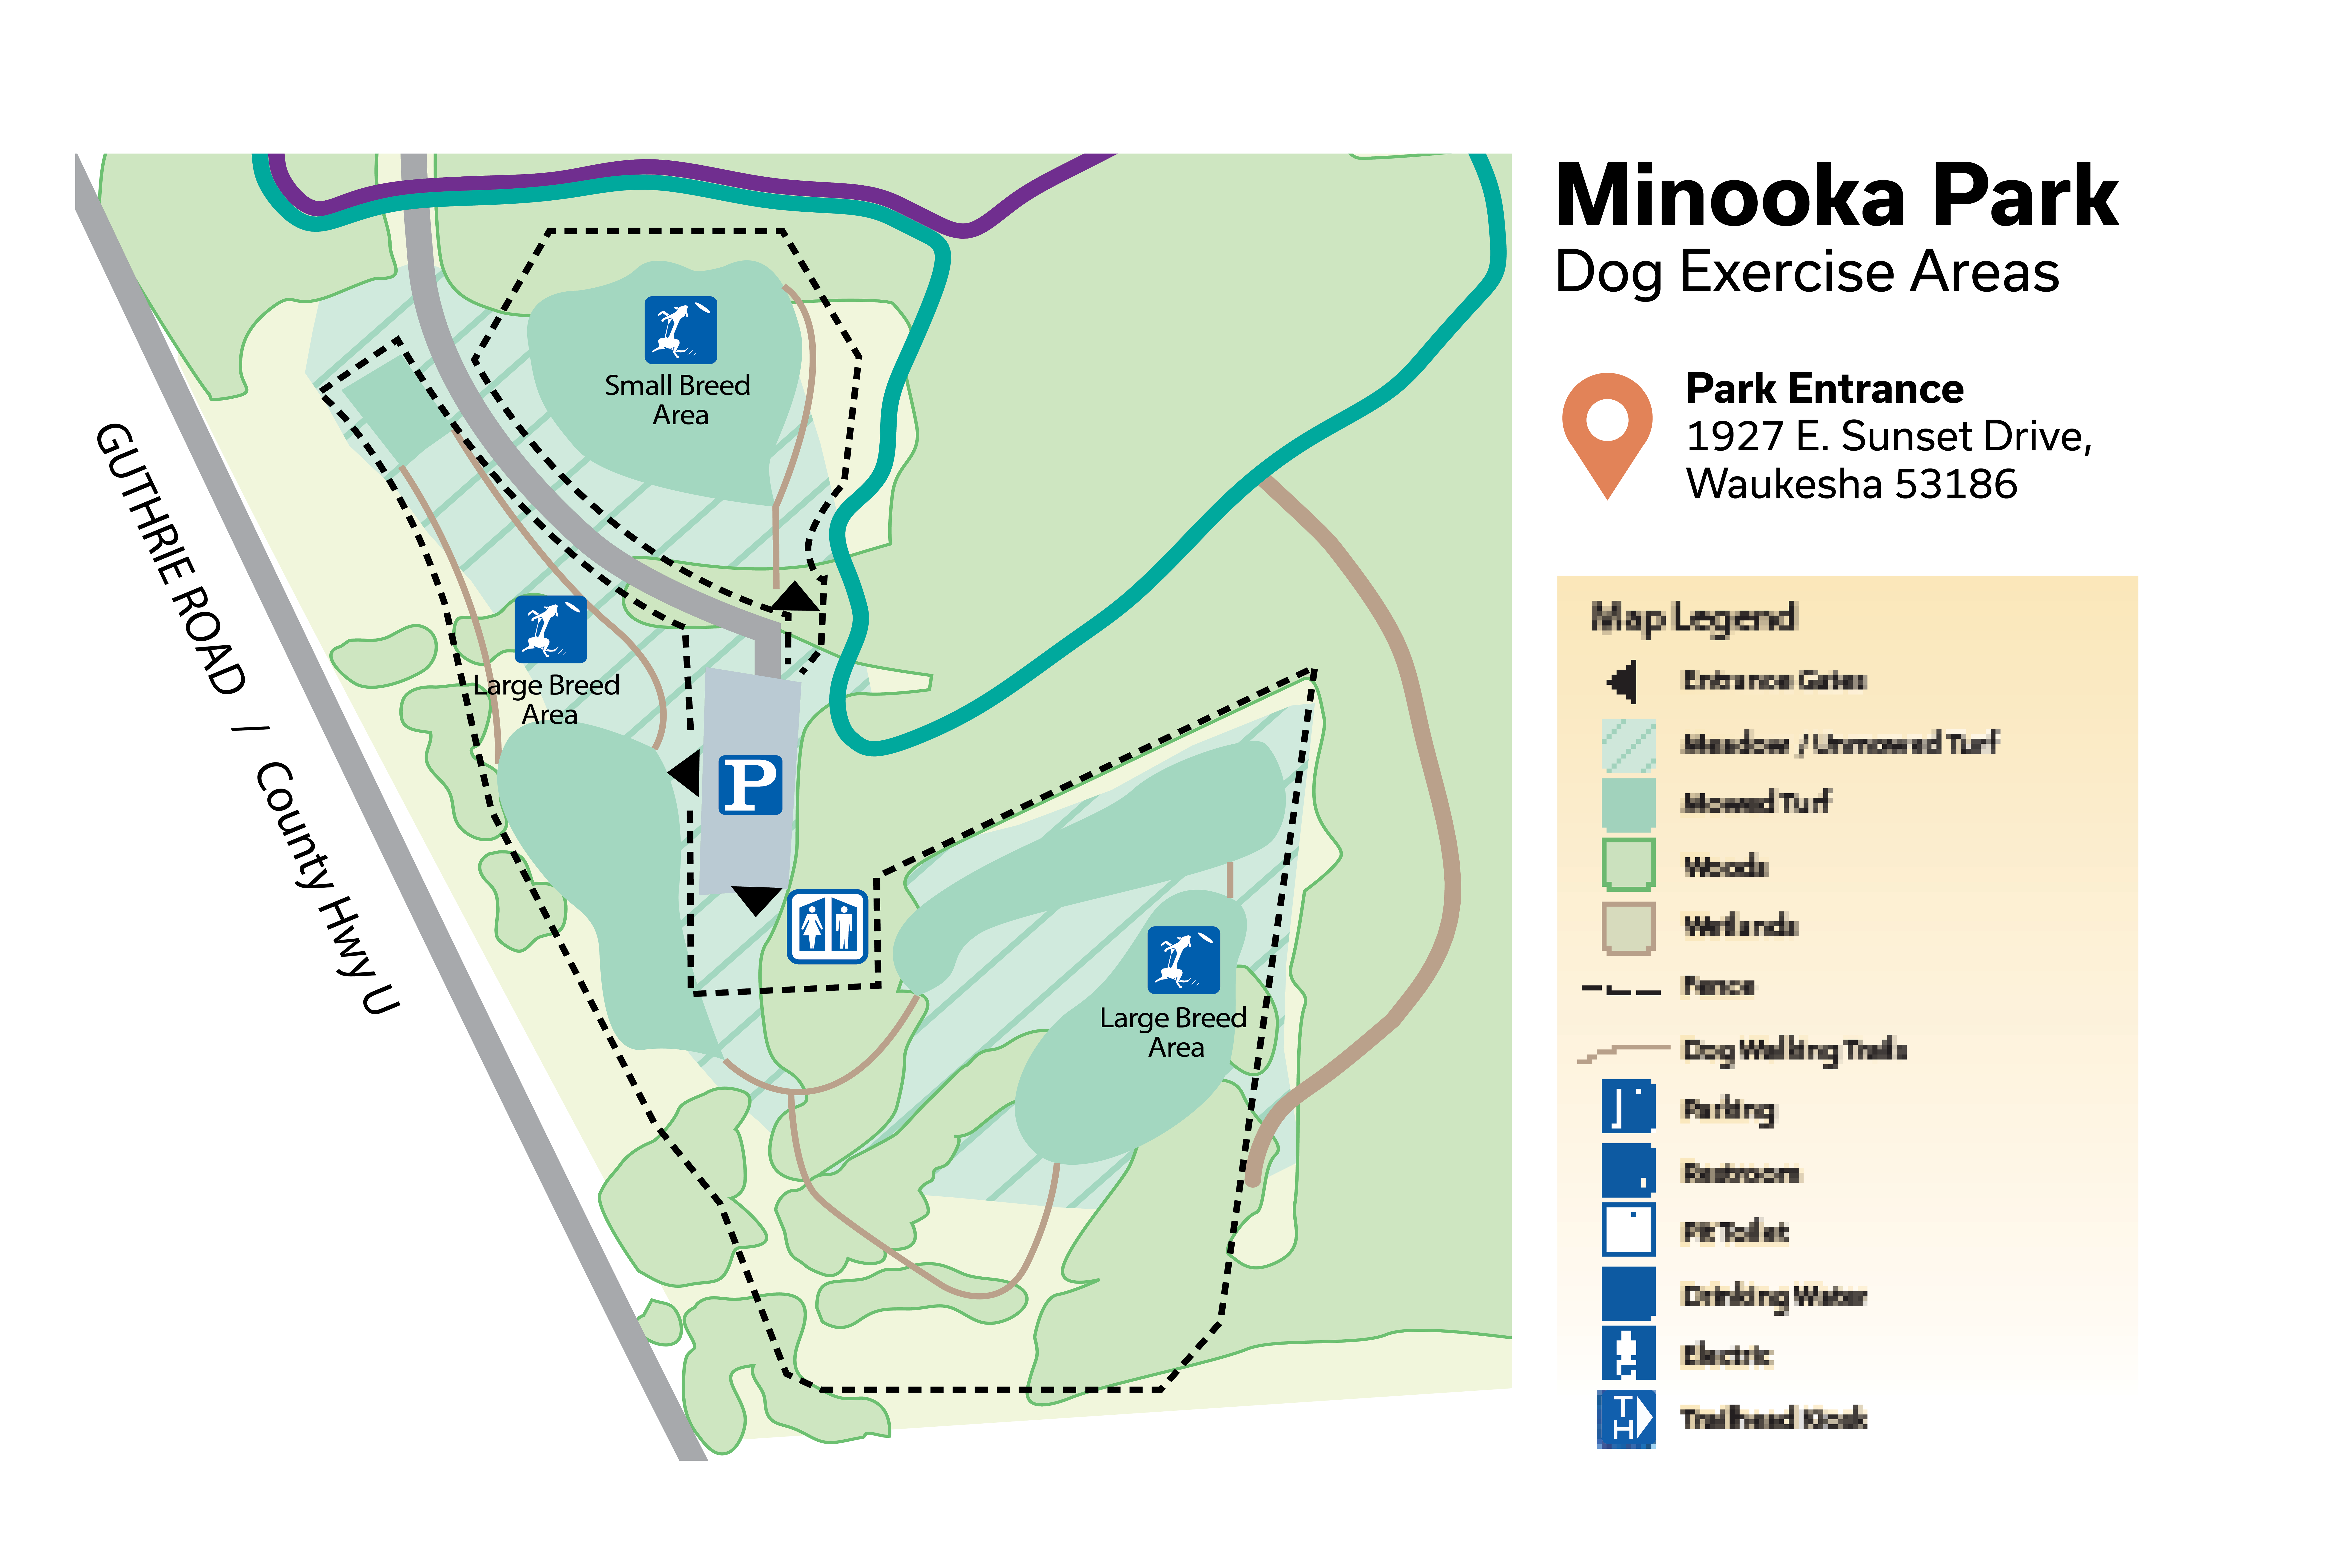 Map of Dog Exercise Areas at Minooka Park - Waukesha County Parks